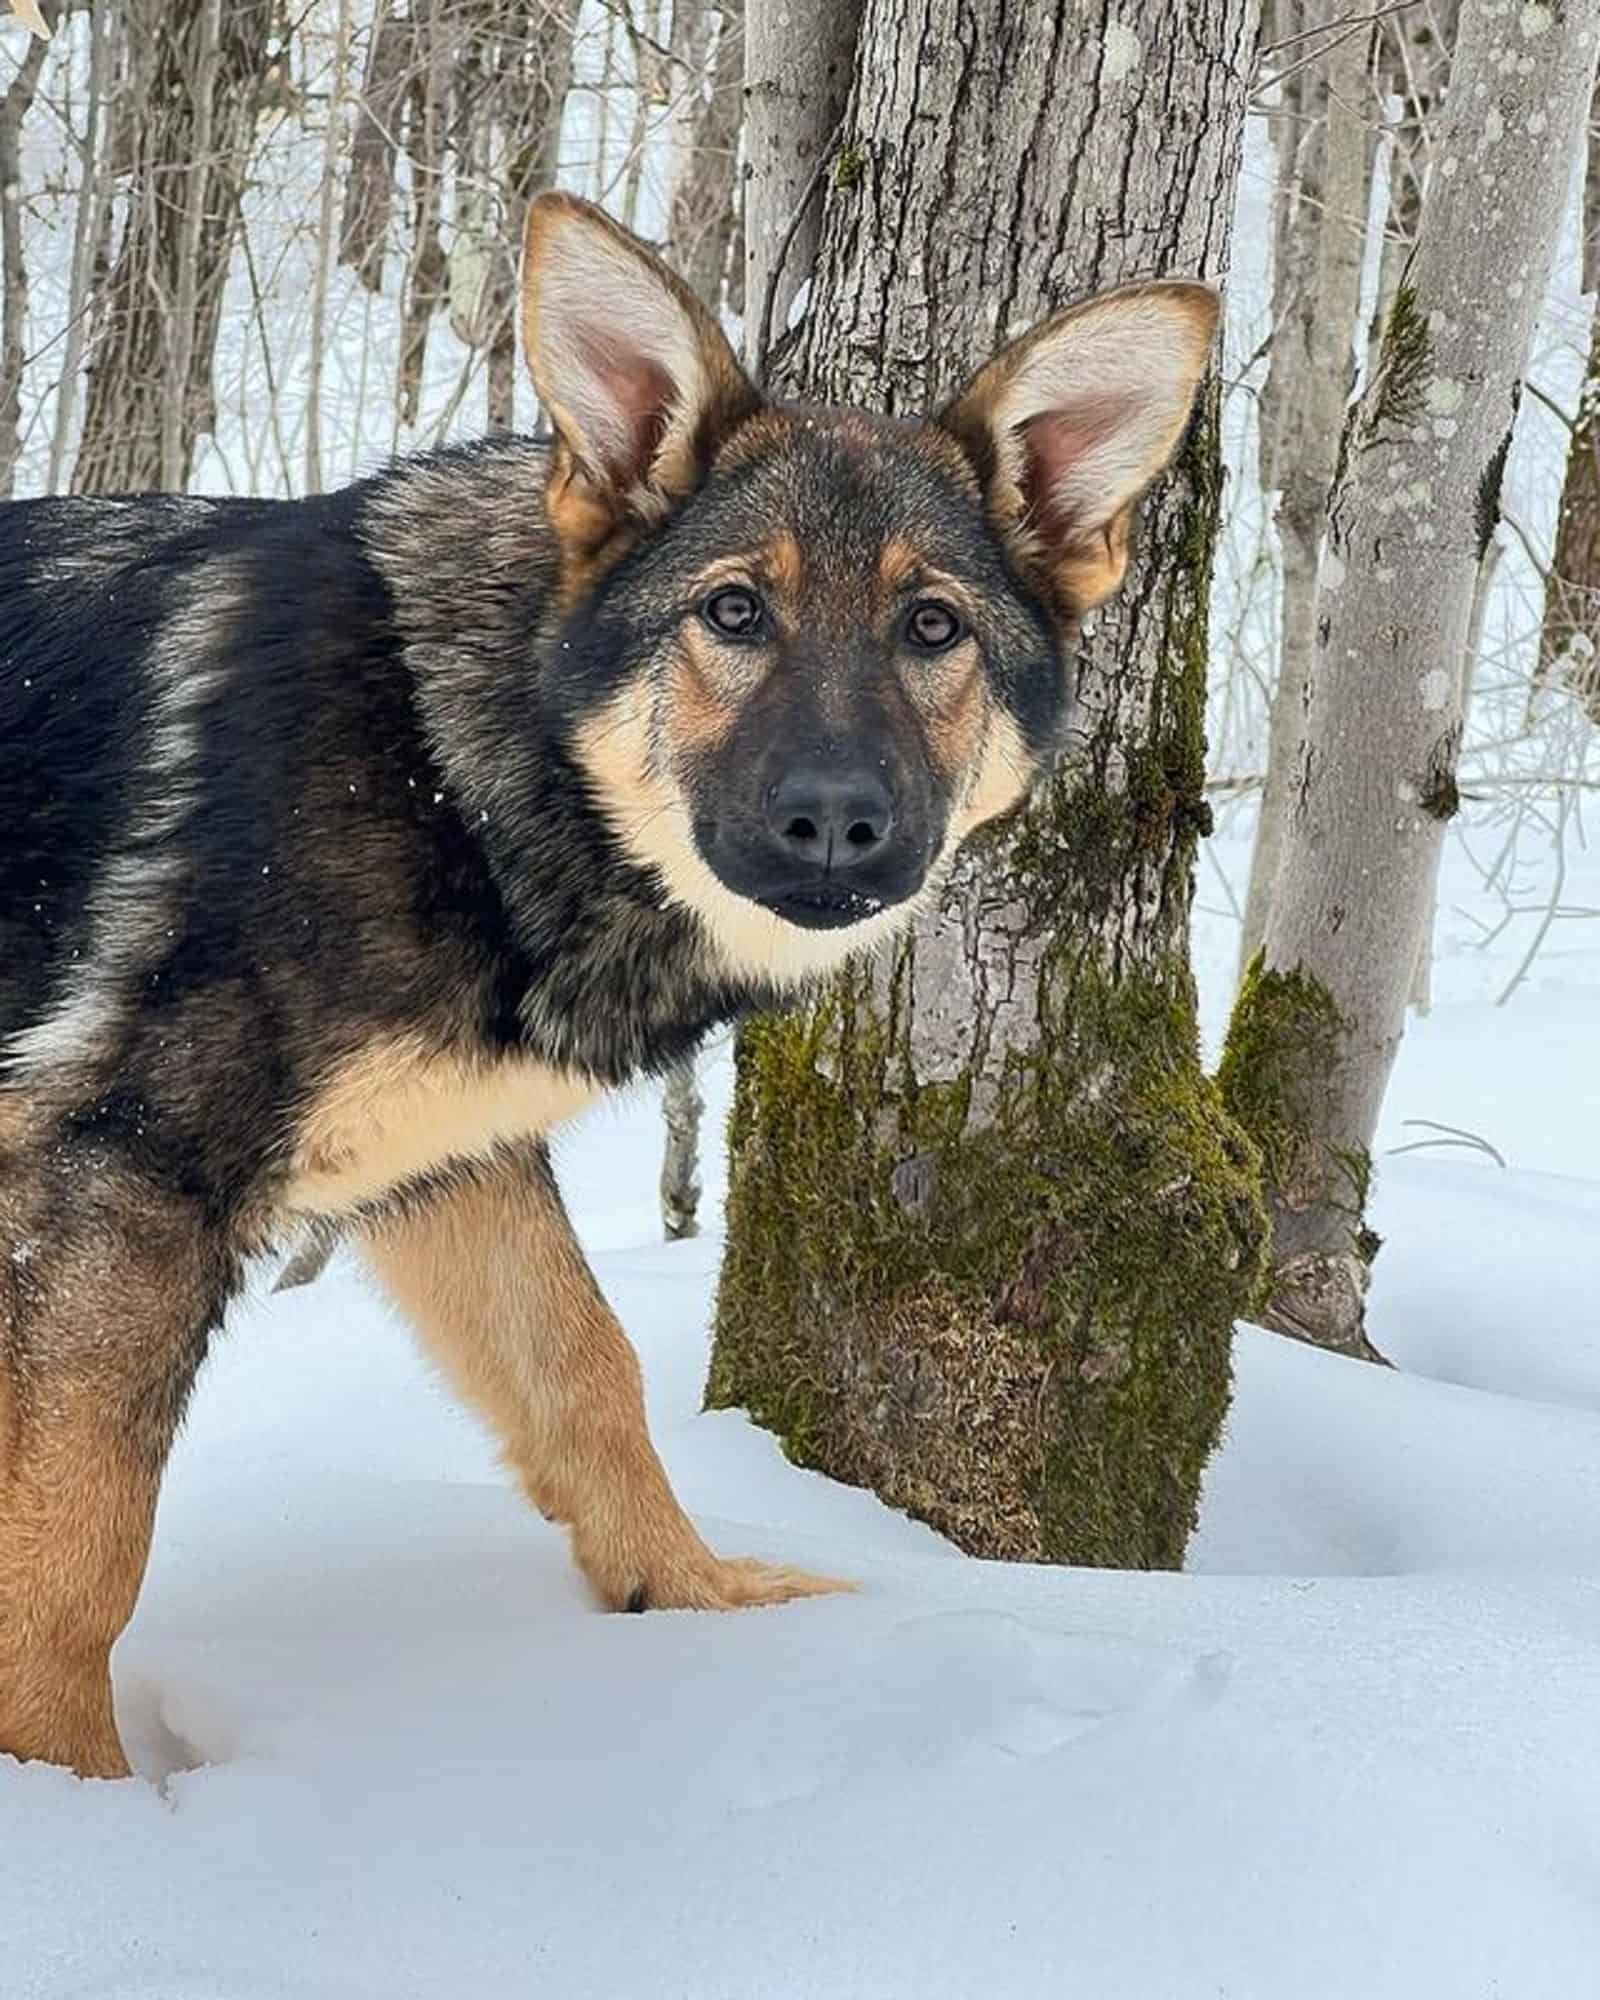 sable german shepherd dog walking on the snow in forest